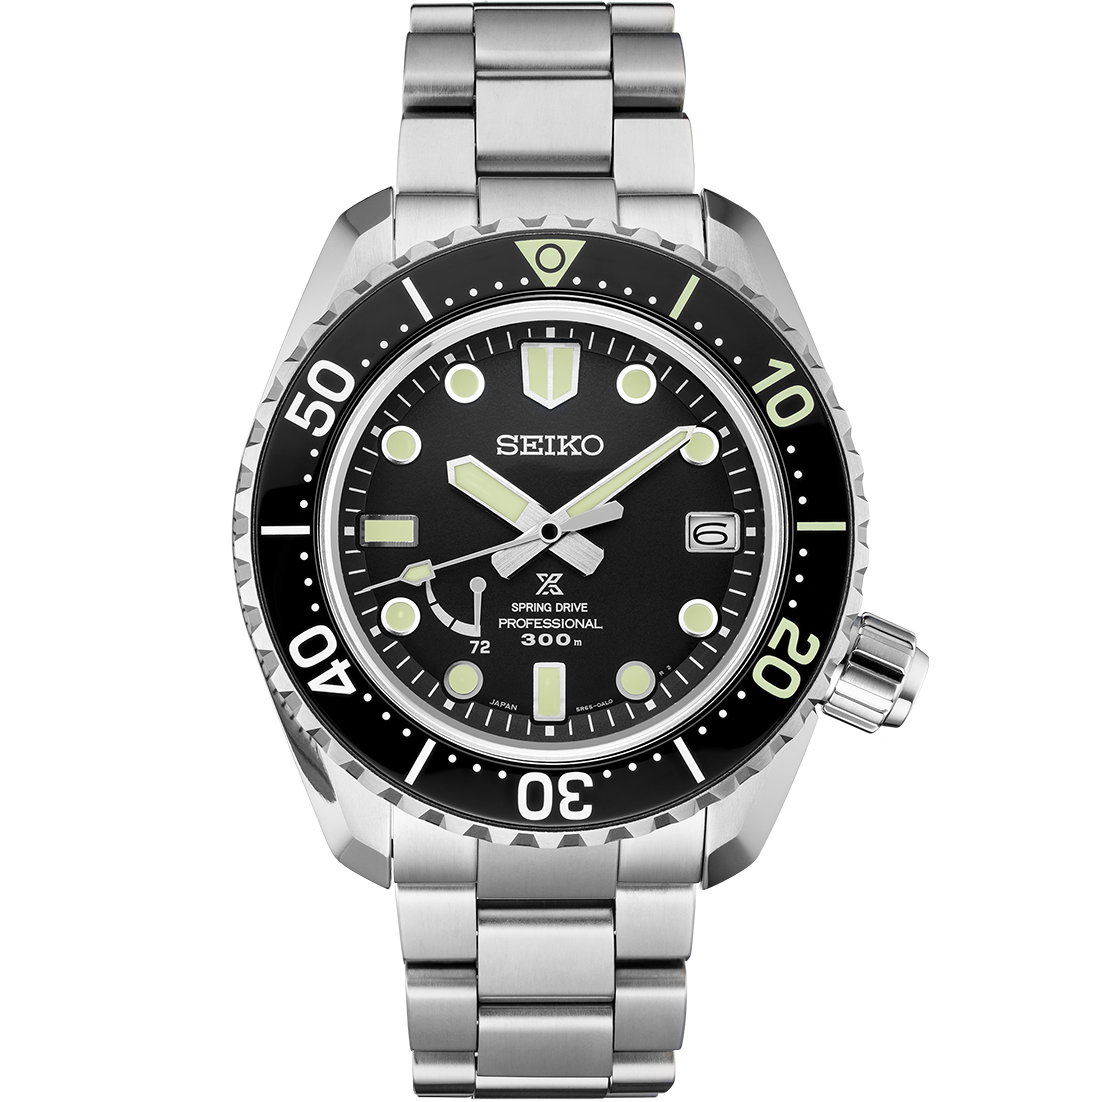 Seiko Prospex LX SNR029 Spring Drive Diver 45mm Automatic Watch | Skeie's  Jewelers